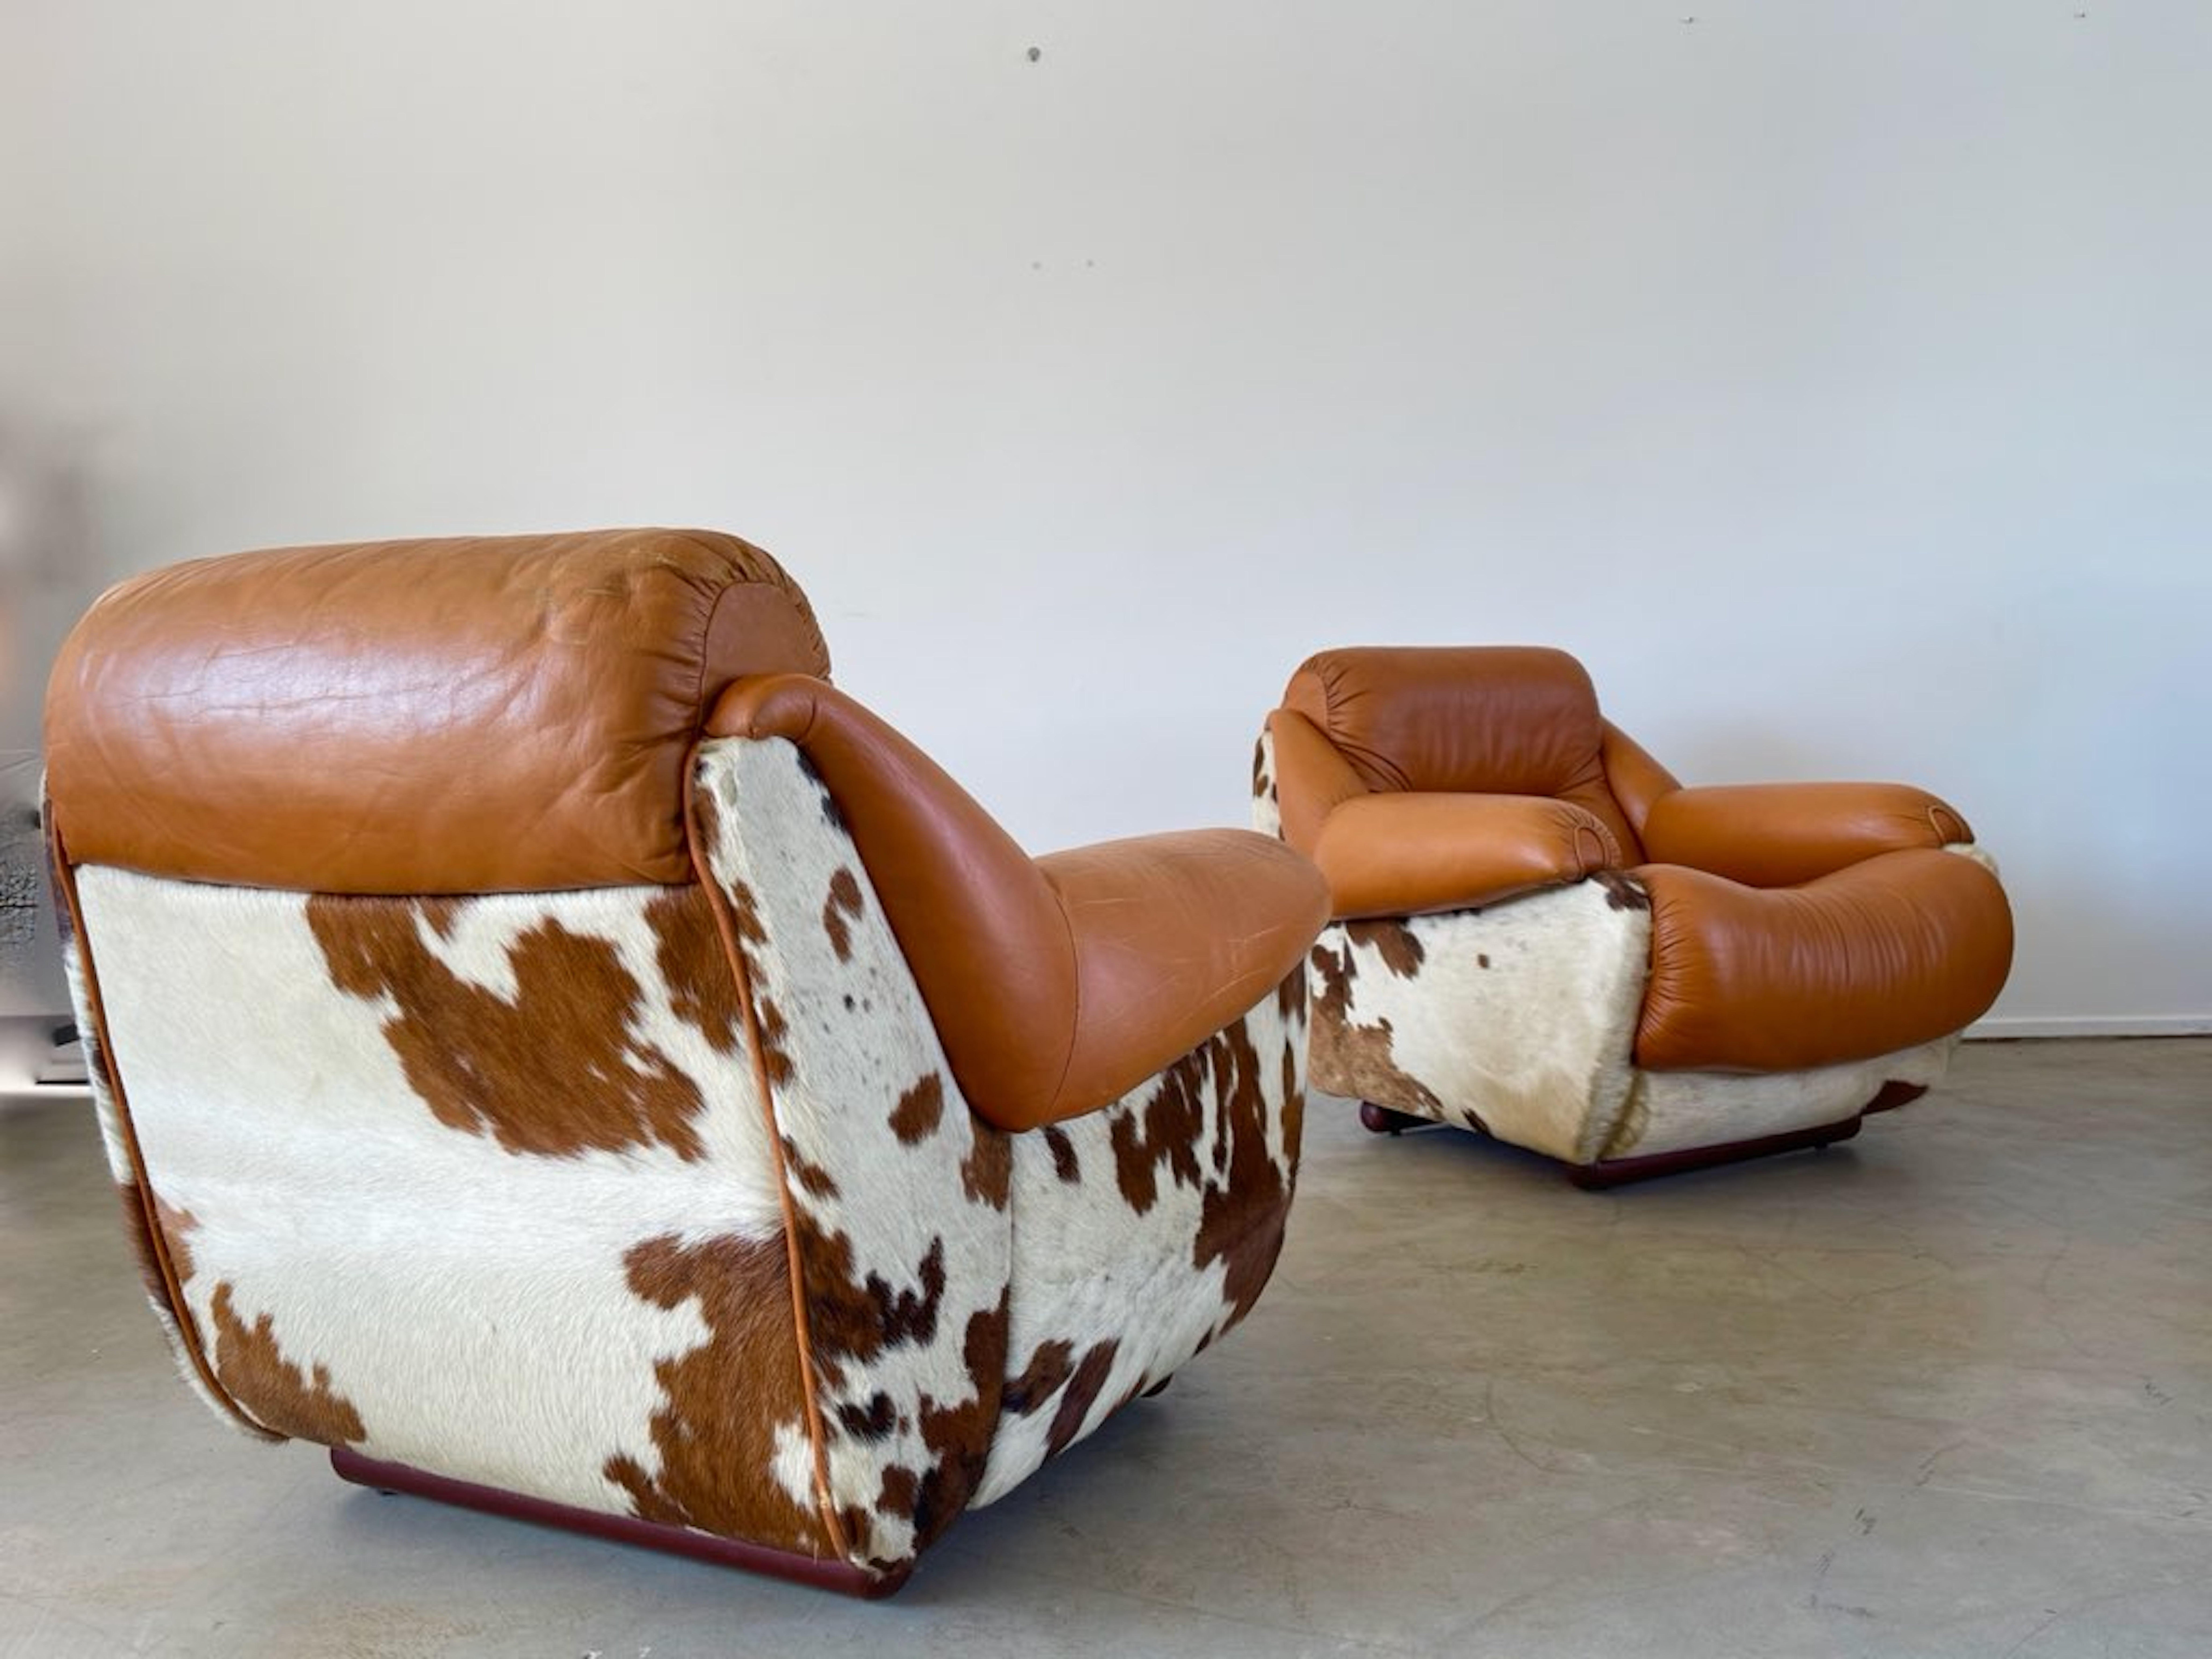 Italian leather chairs with original cow hide and caramel leather, circa 1970s.
Soft leather with wonderful patina.
Floats.